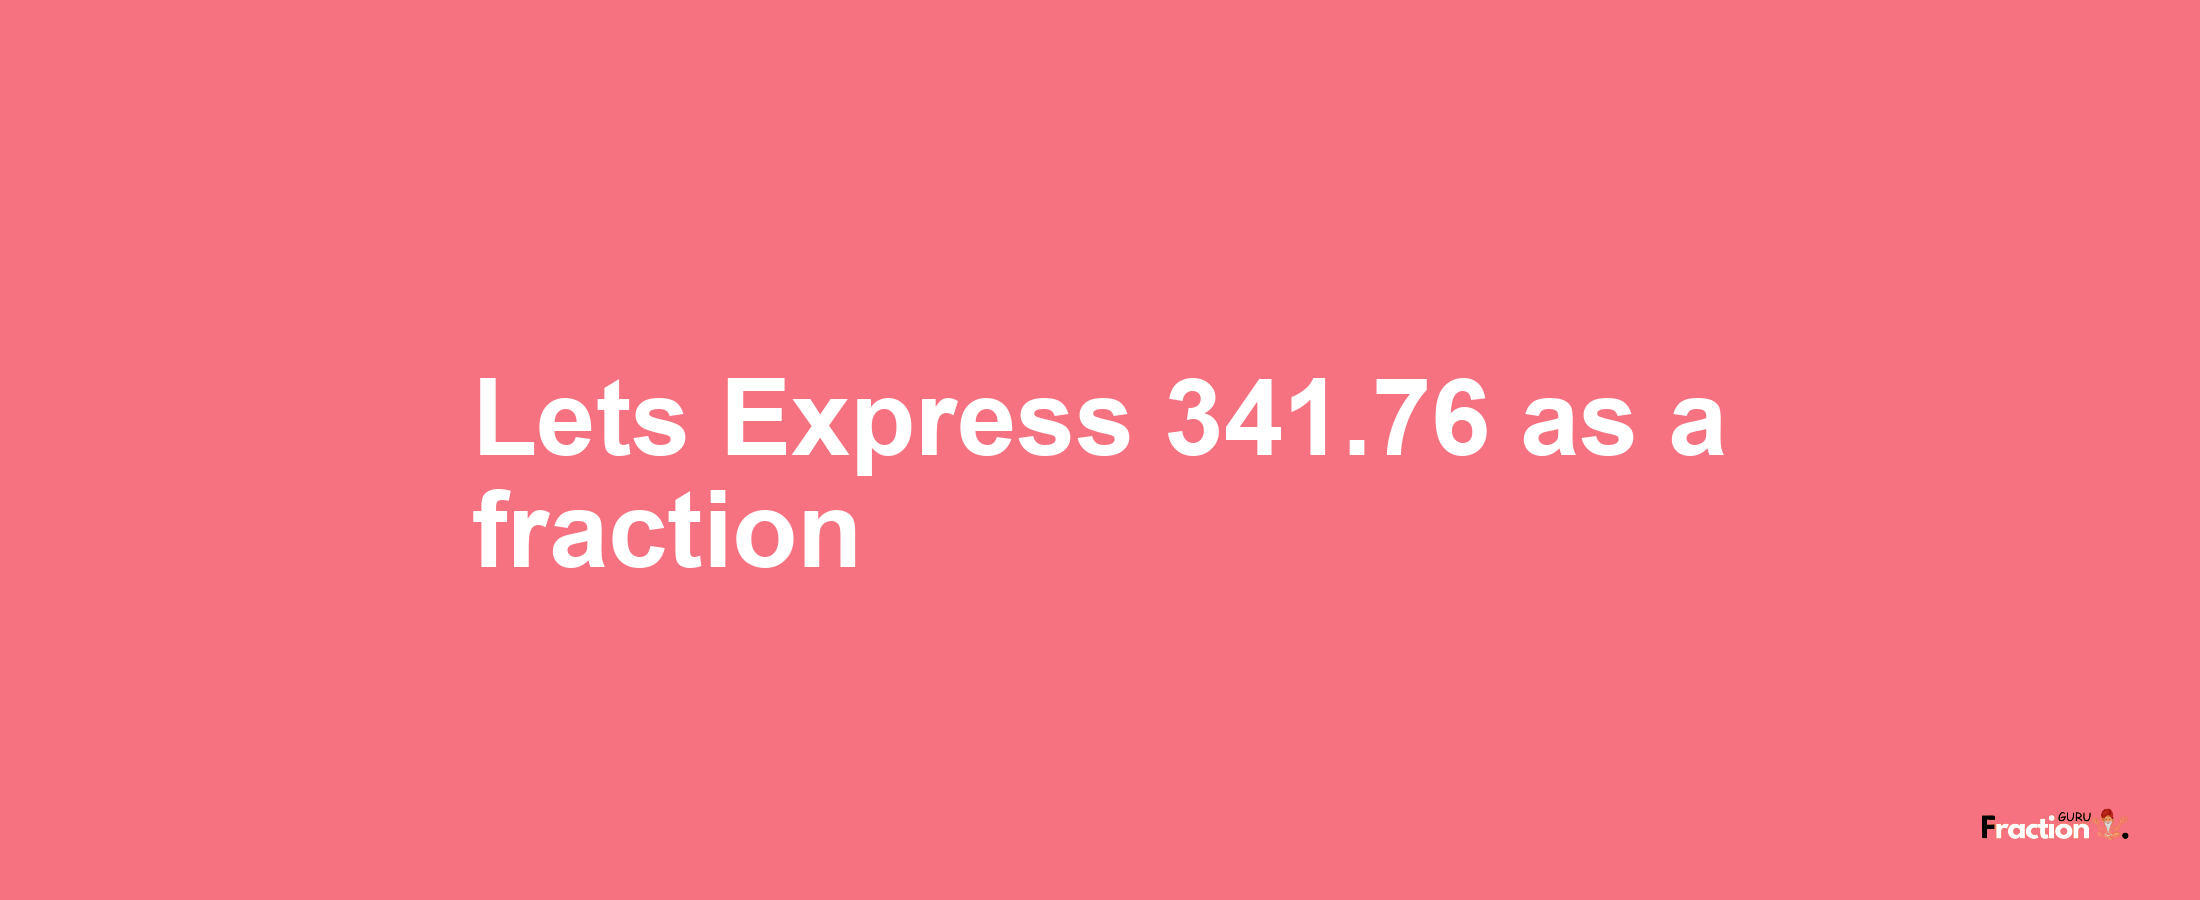 Lets Express 341.76 as afraction